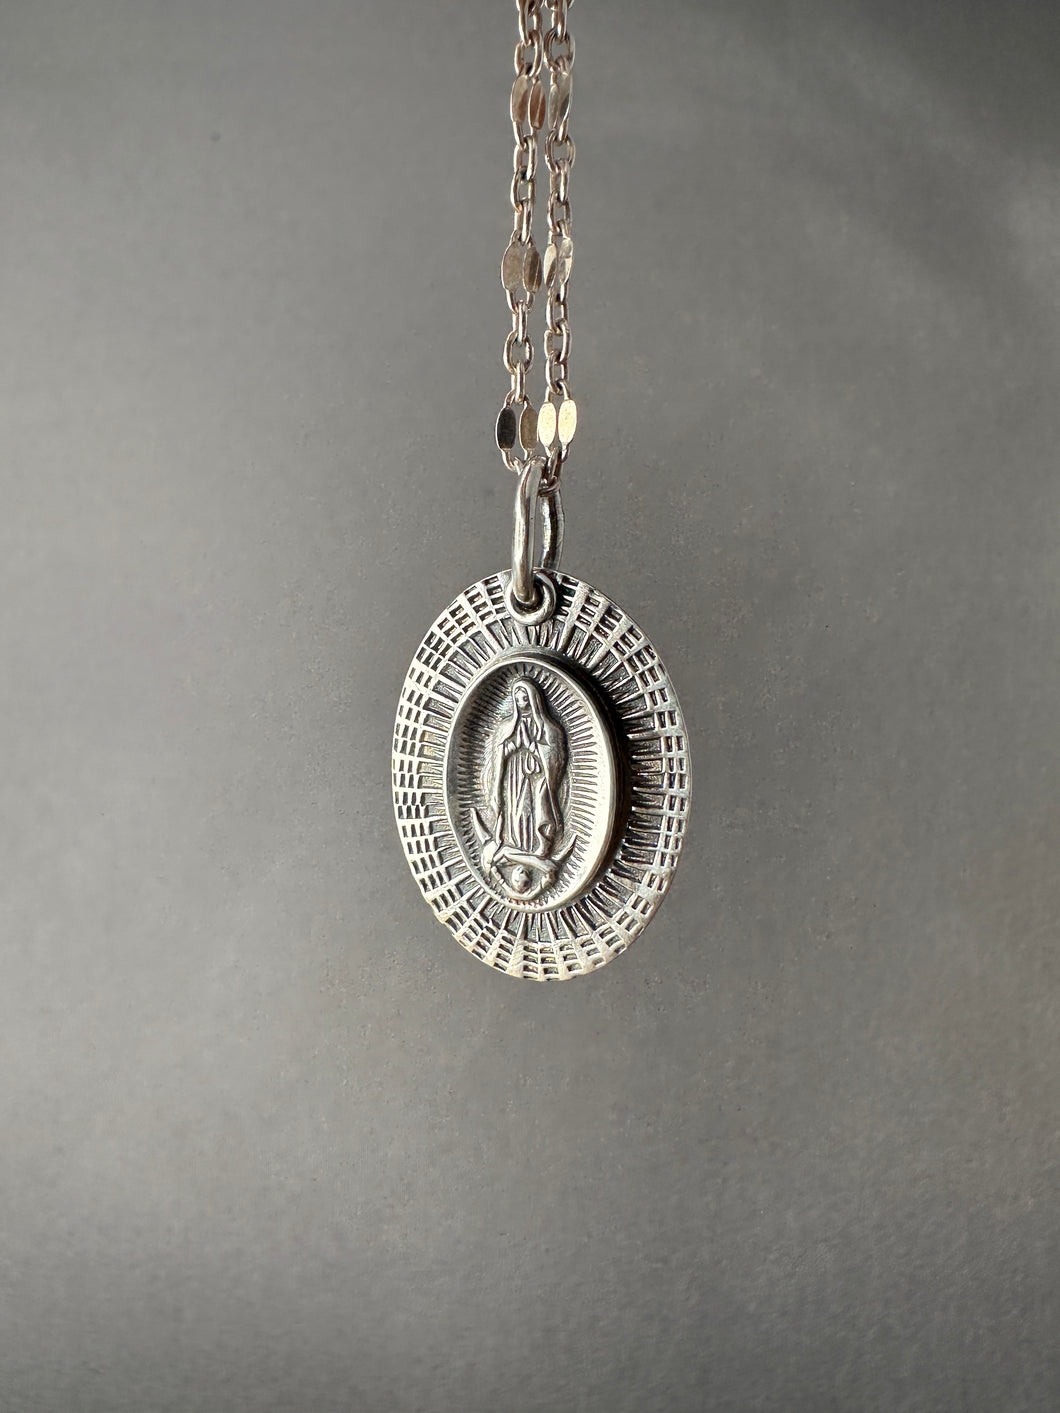 Solid Silver Our Lady of Guadalupe(Ready to ship) - limited quantity